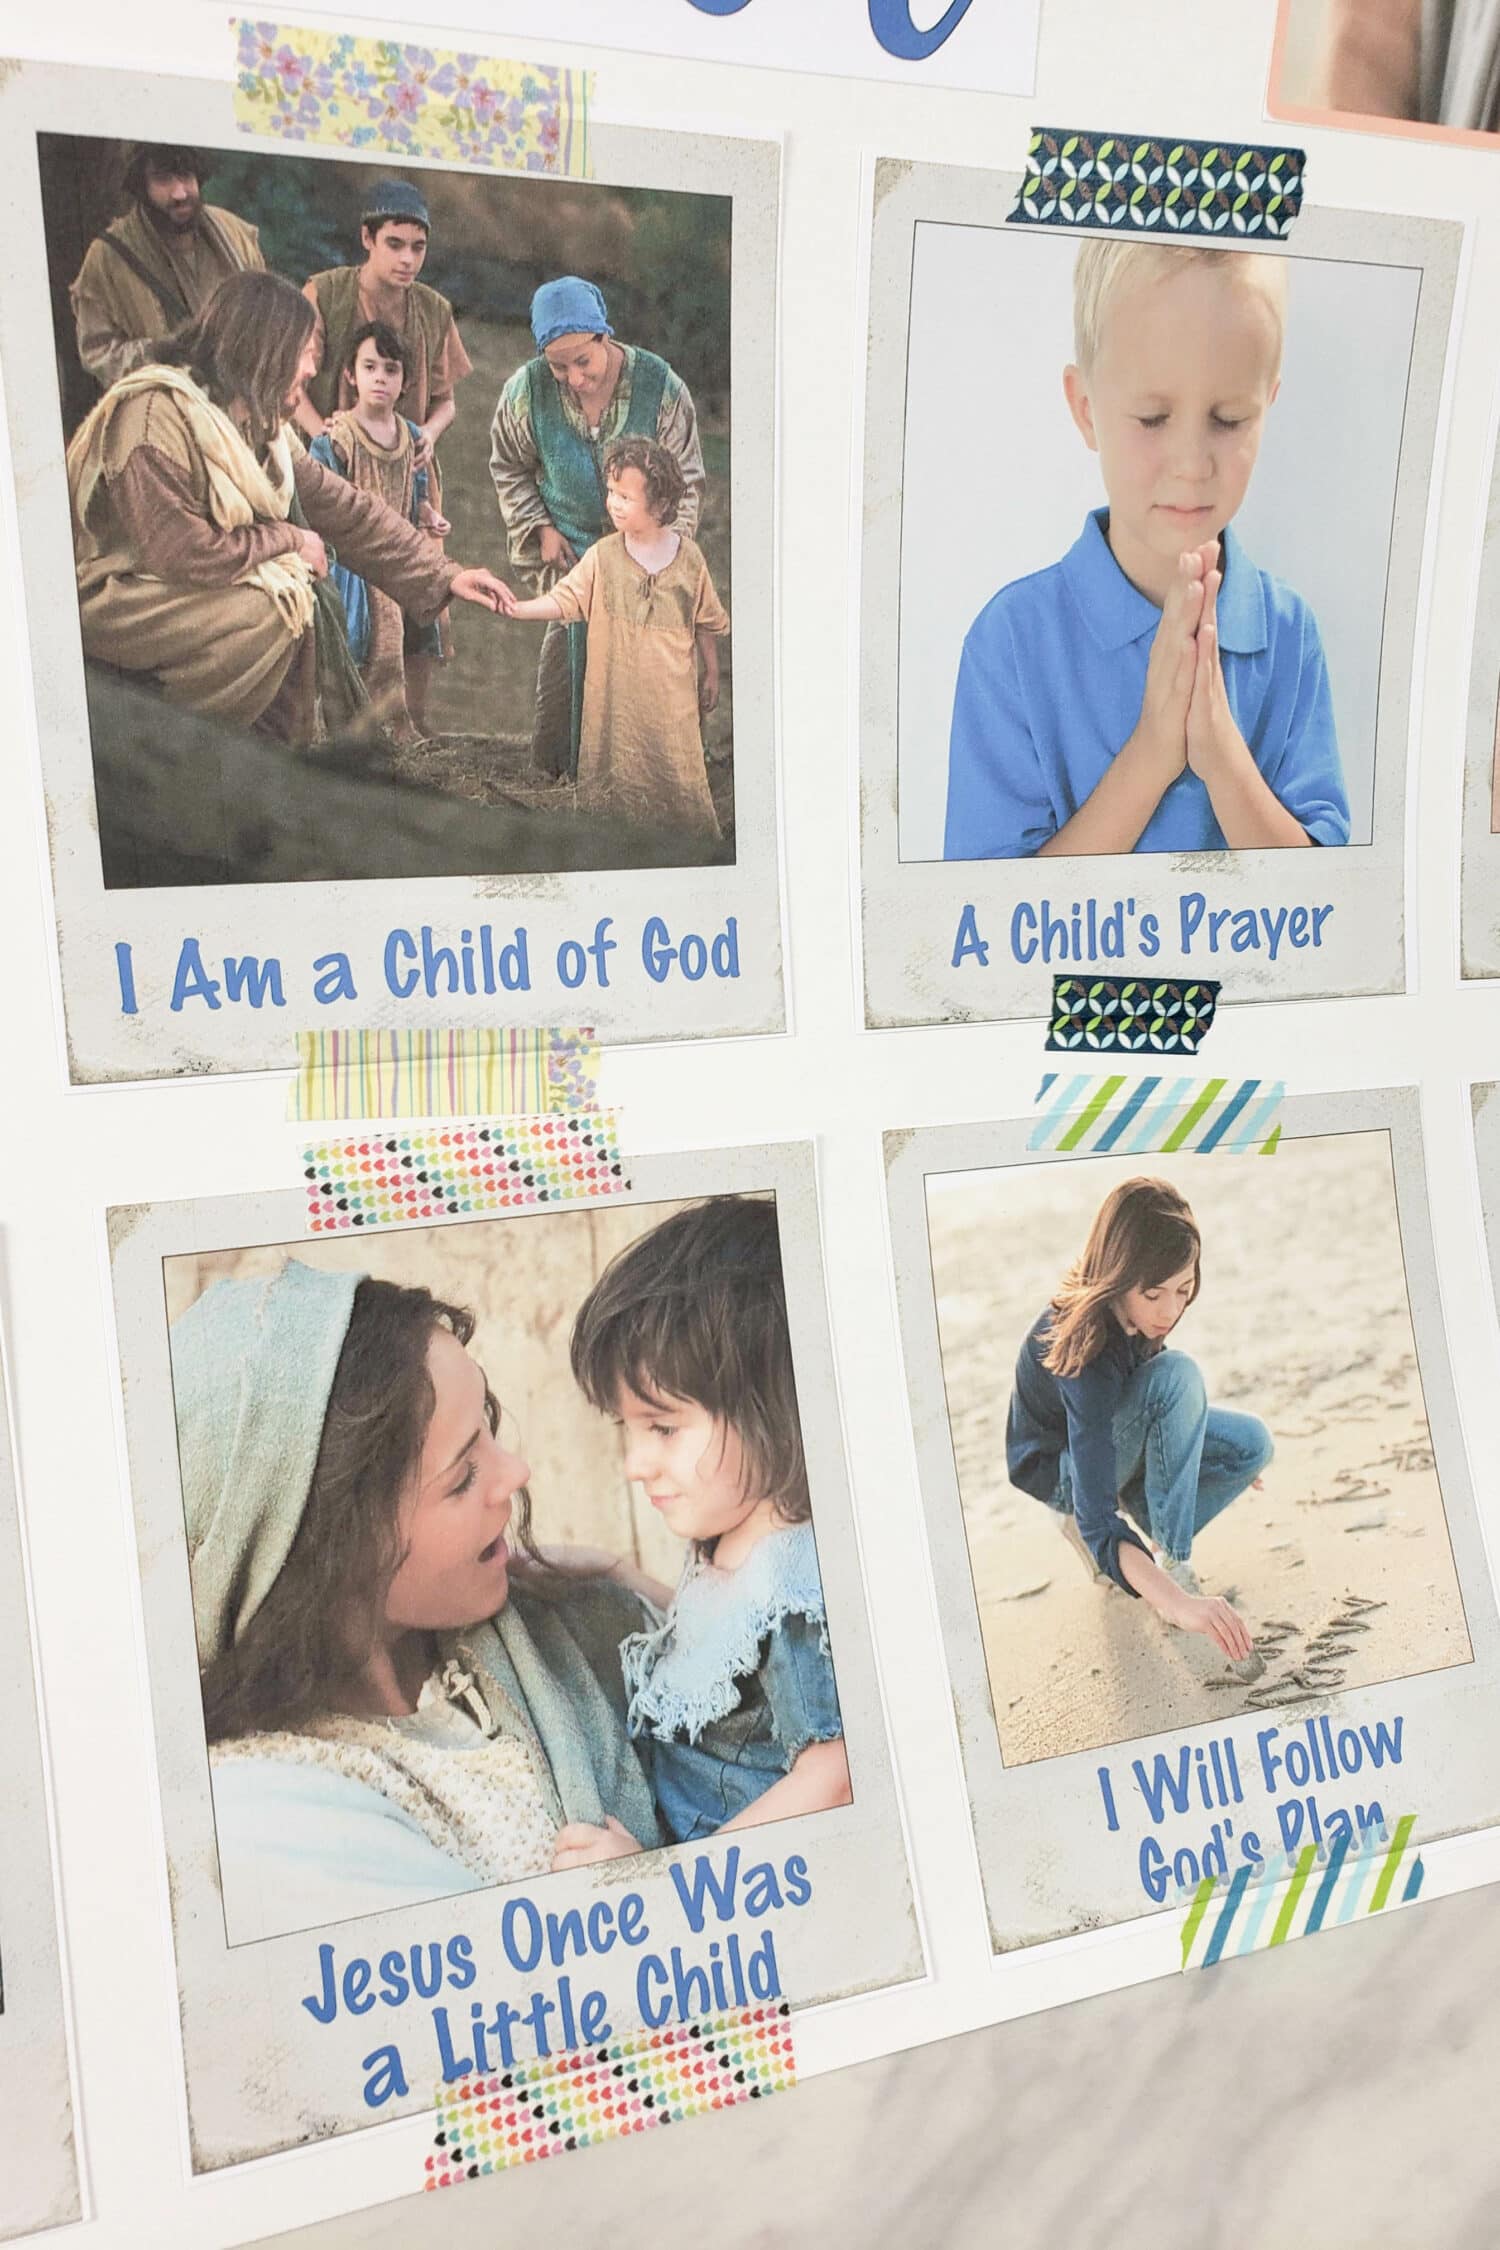 Focus on the Savior New Testament Primary Program Review theme to practice and perfect all of your songs and hymns before the Primary Presentation. With printable song helps for all of the Come Follow Me Primary New Testament songs. For LDS Music Leaders Singing Time.